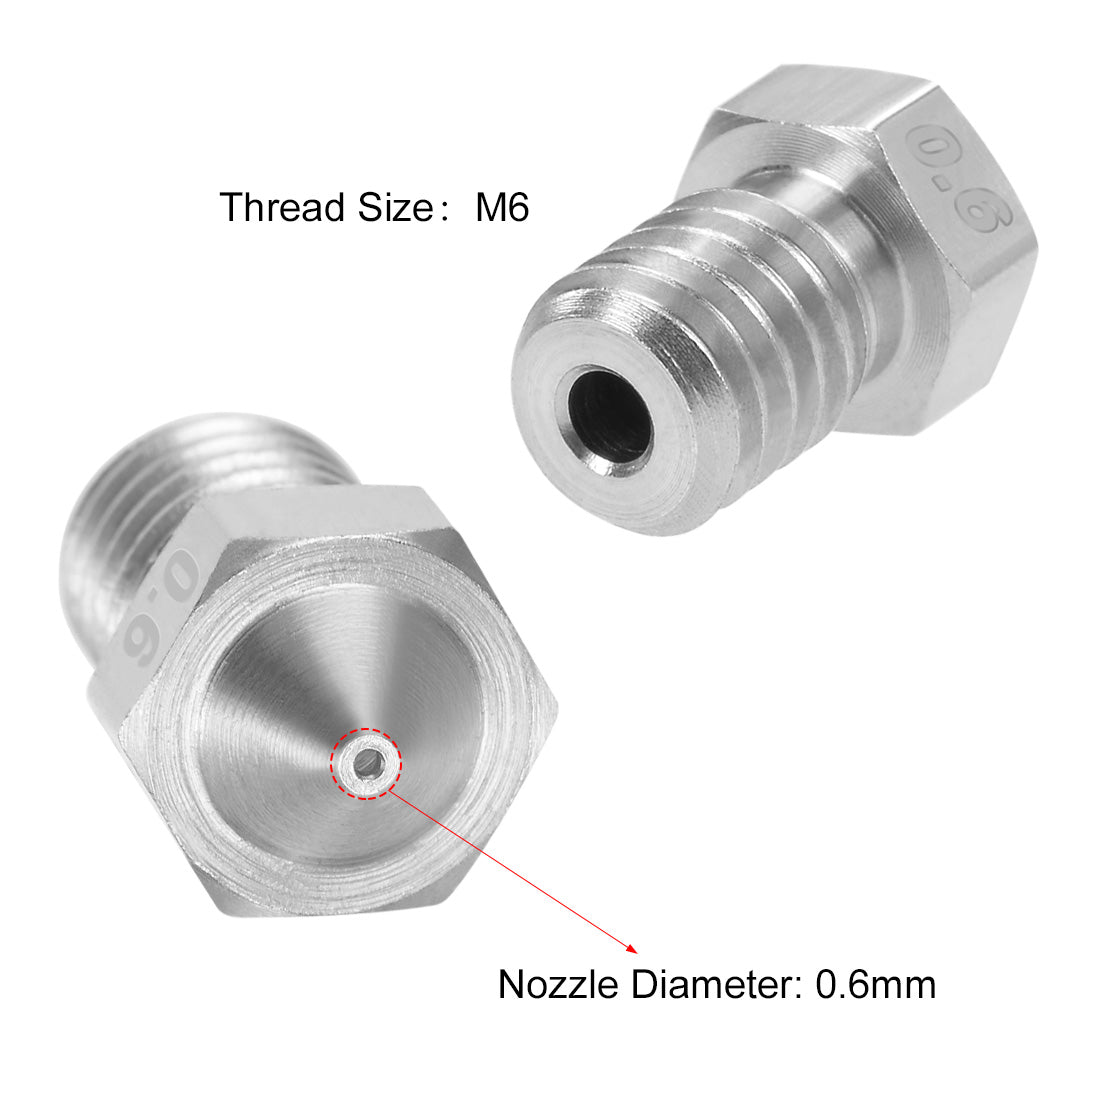 uxcell Uxcell 0.6mm 3D Printer Nozzle Head M6 Thread Replacement for V5 V6 1.75mm Extruder Print, Stainless Steel 4pcs